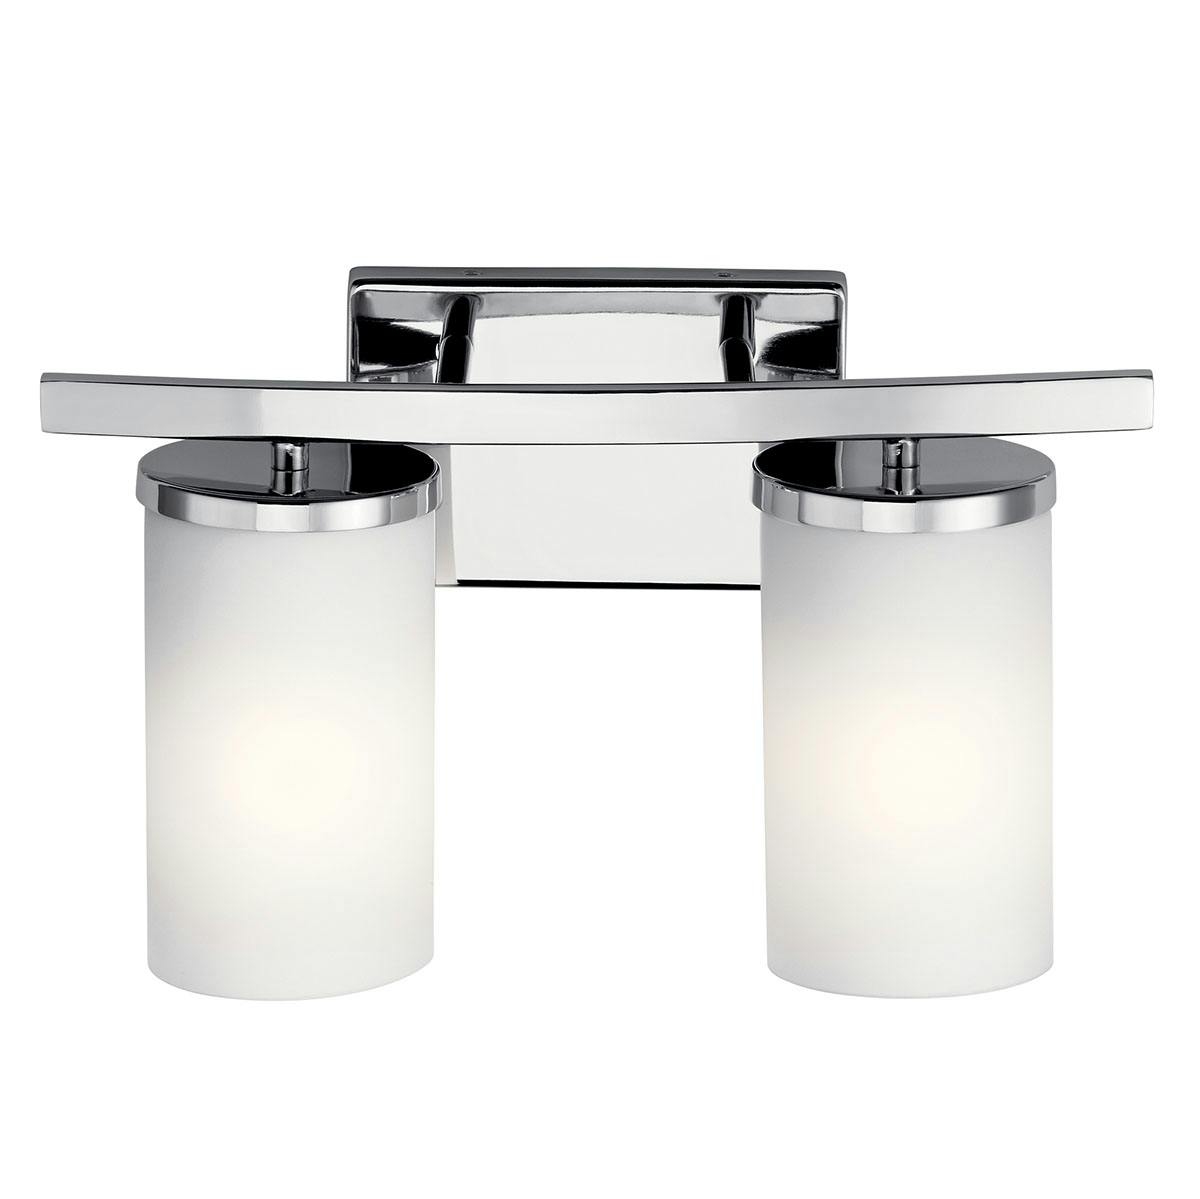 The Crosby 2 Light Bath Light Chrome facing down on a white background